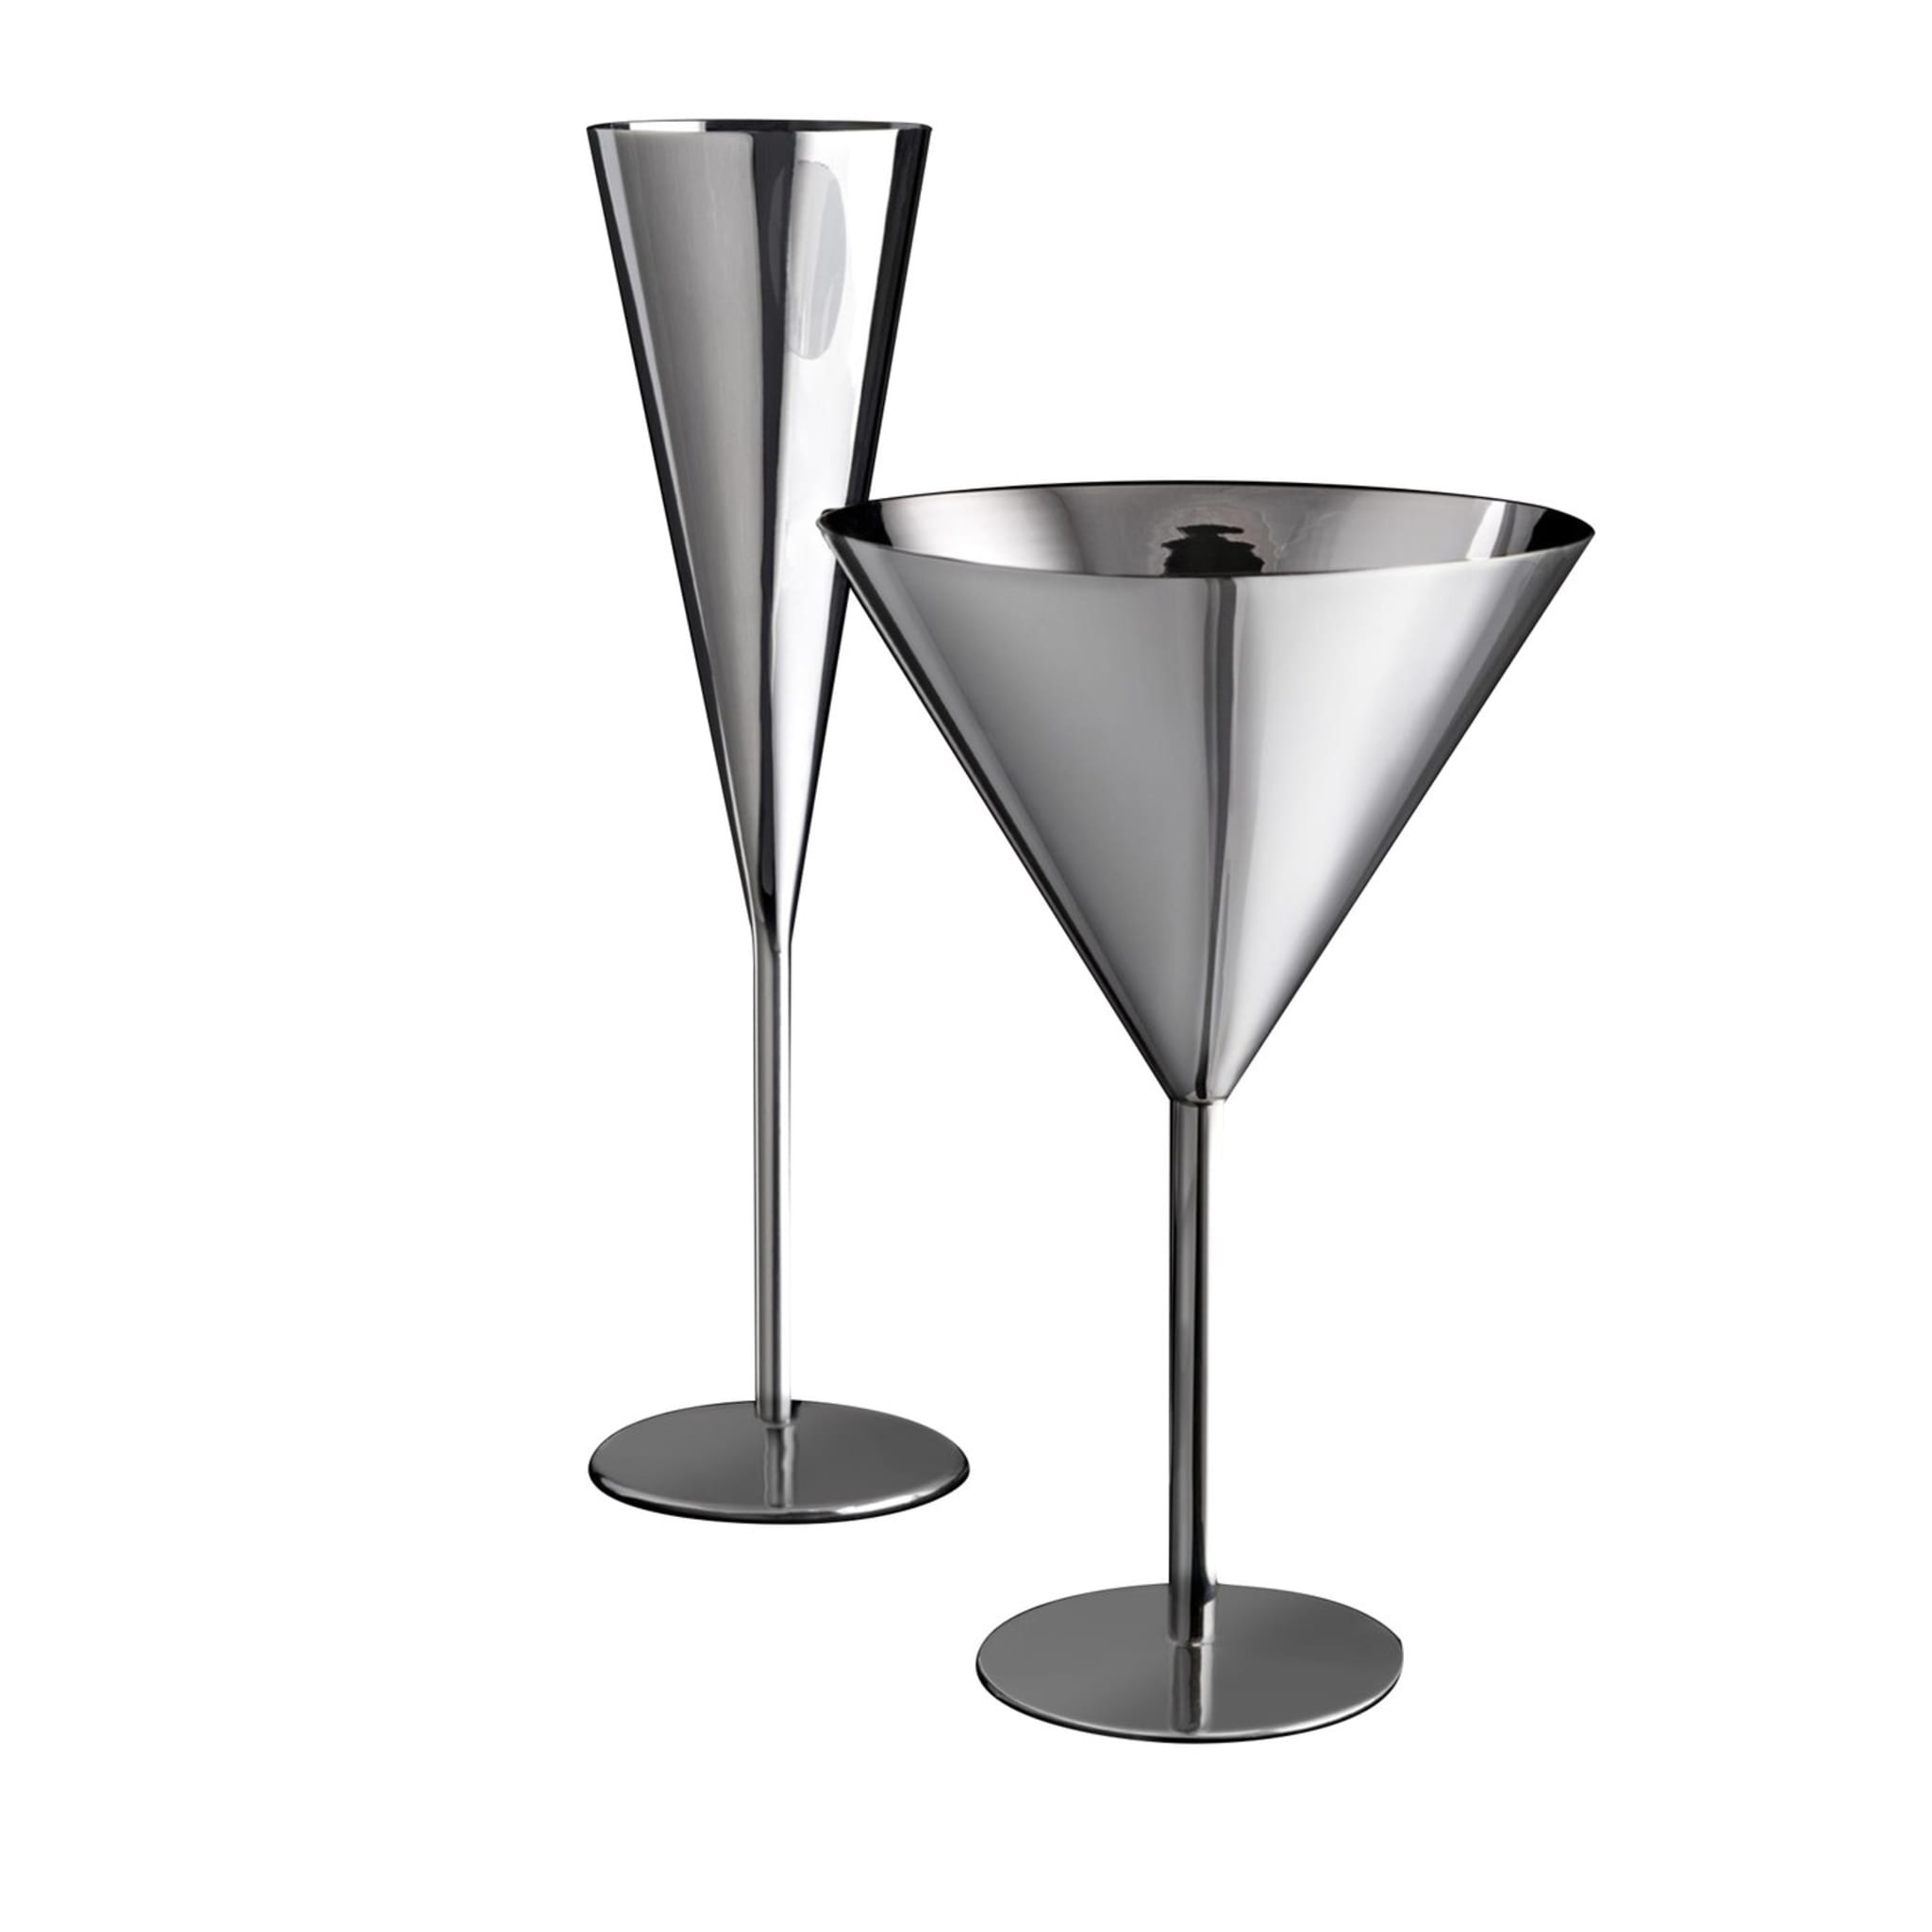 Millenium Set of Champagne Flute and Martini Glass by Lella and Massimo Vignelli - Main view